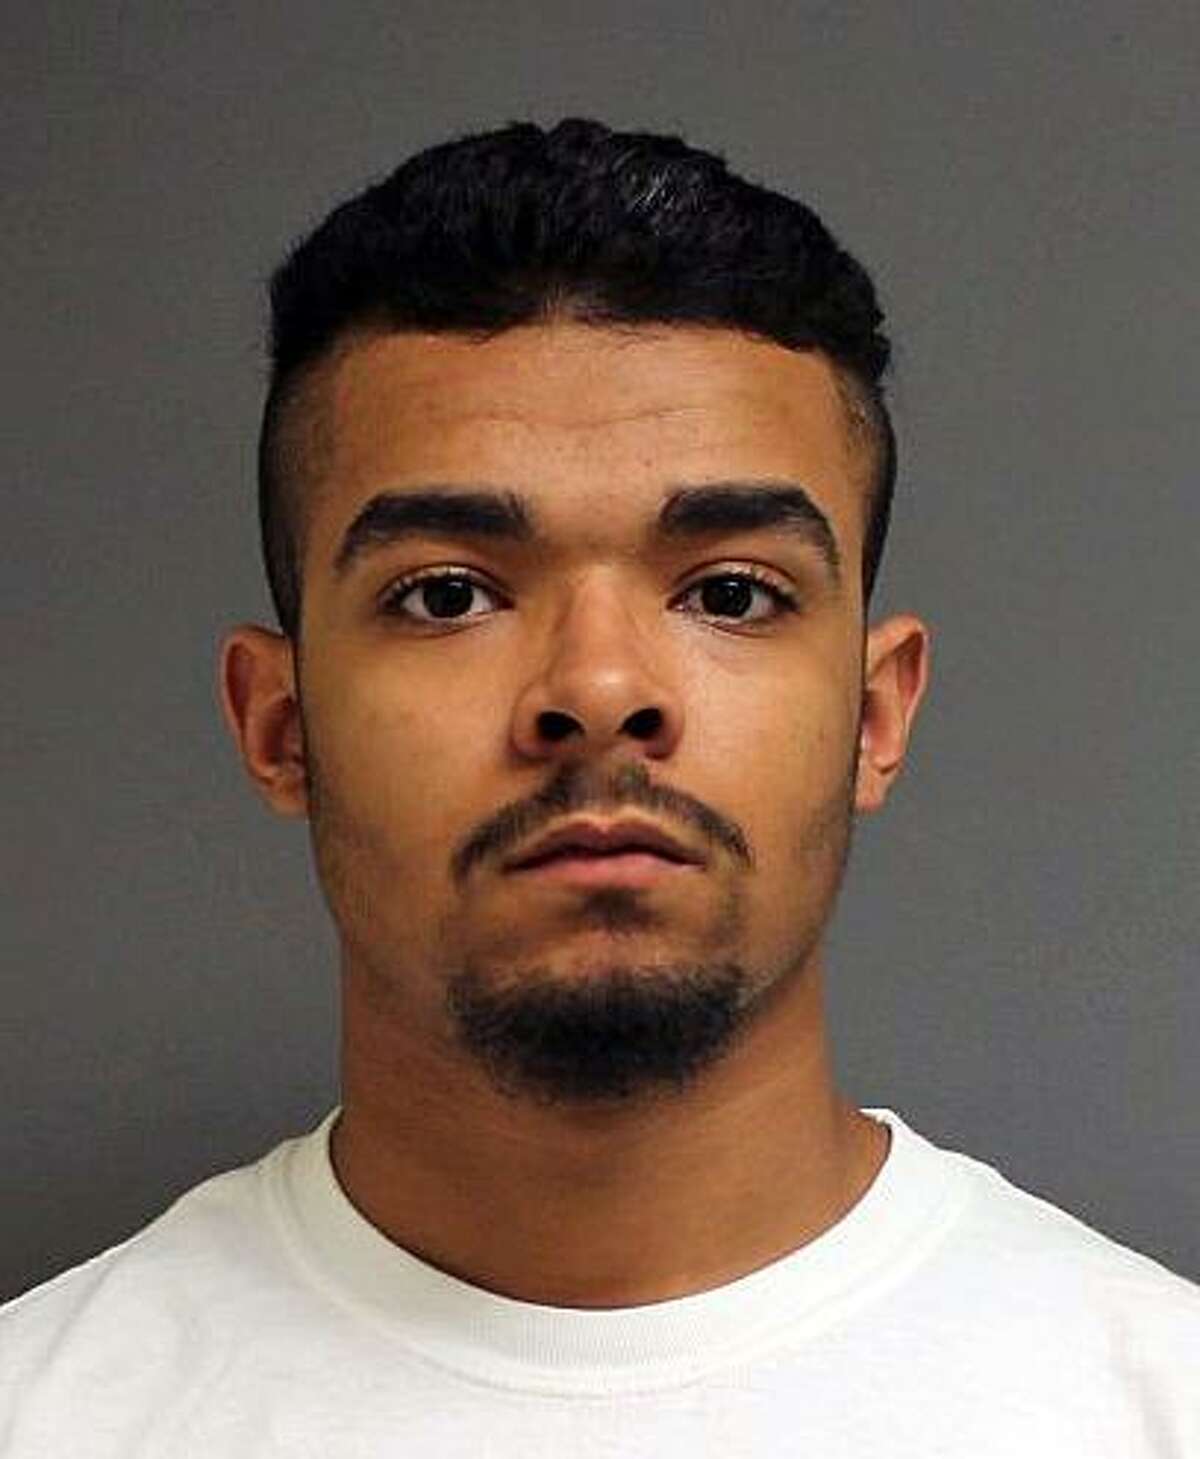 Lawrence Carter, 19, of Bridgeport, Conn., was charged with two counts of first-degree manslaughter, two counts of negligent homicide with a motor vehicle, four counts of first-degree assault and illegal racing on a highway. He posted a $50,000 court-set bond and is expected in Derby Superior Court at 9 a.m. on July 9, 2018.